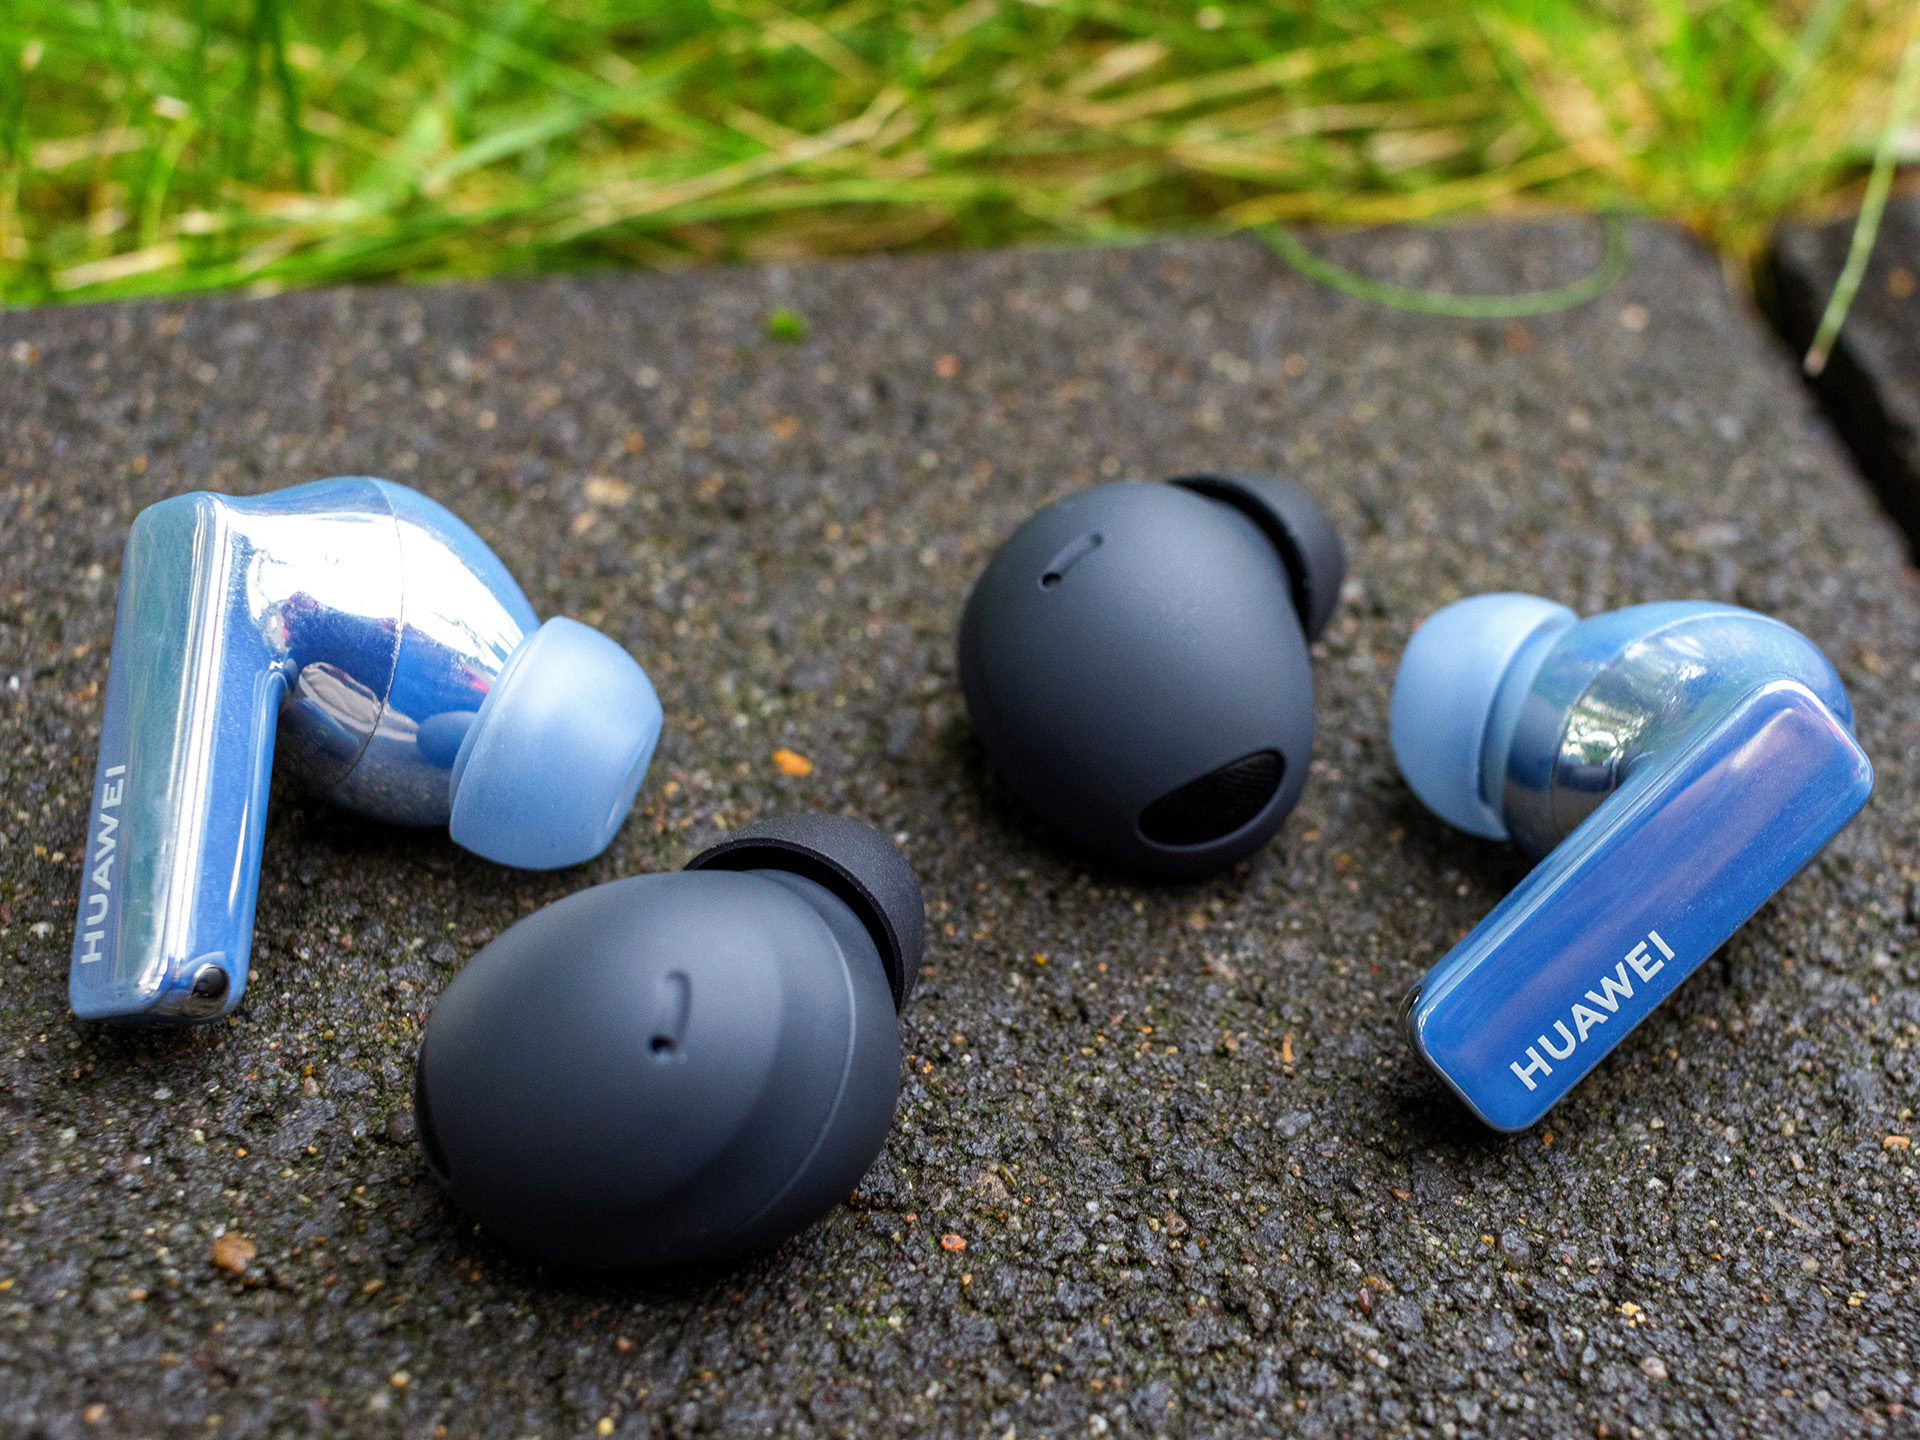 Huawei Freebuds Pro 2 review: These buds are a blast